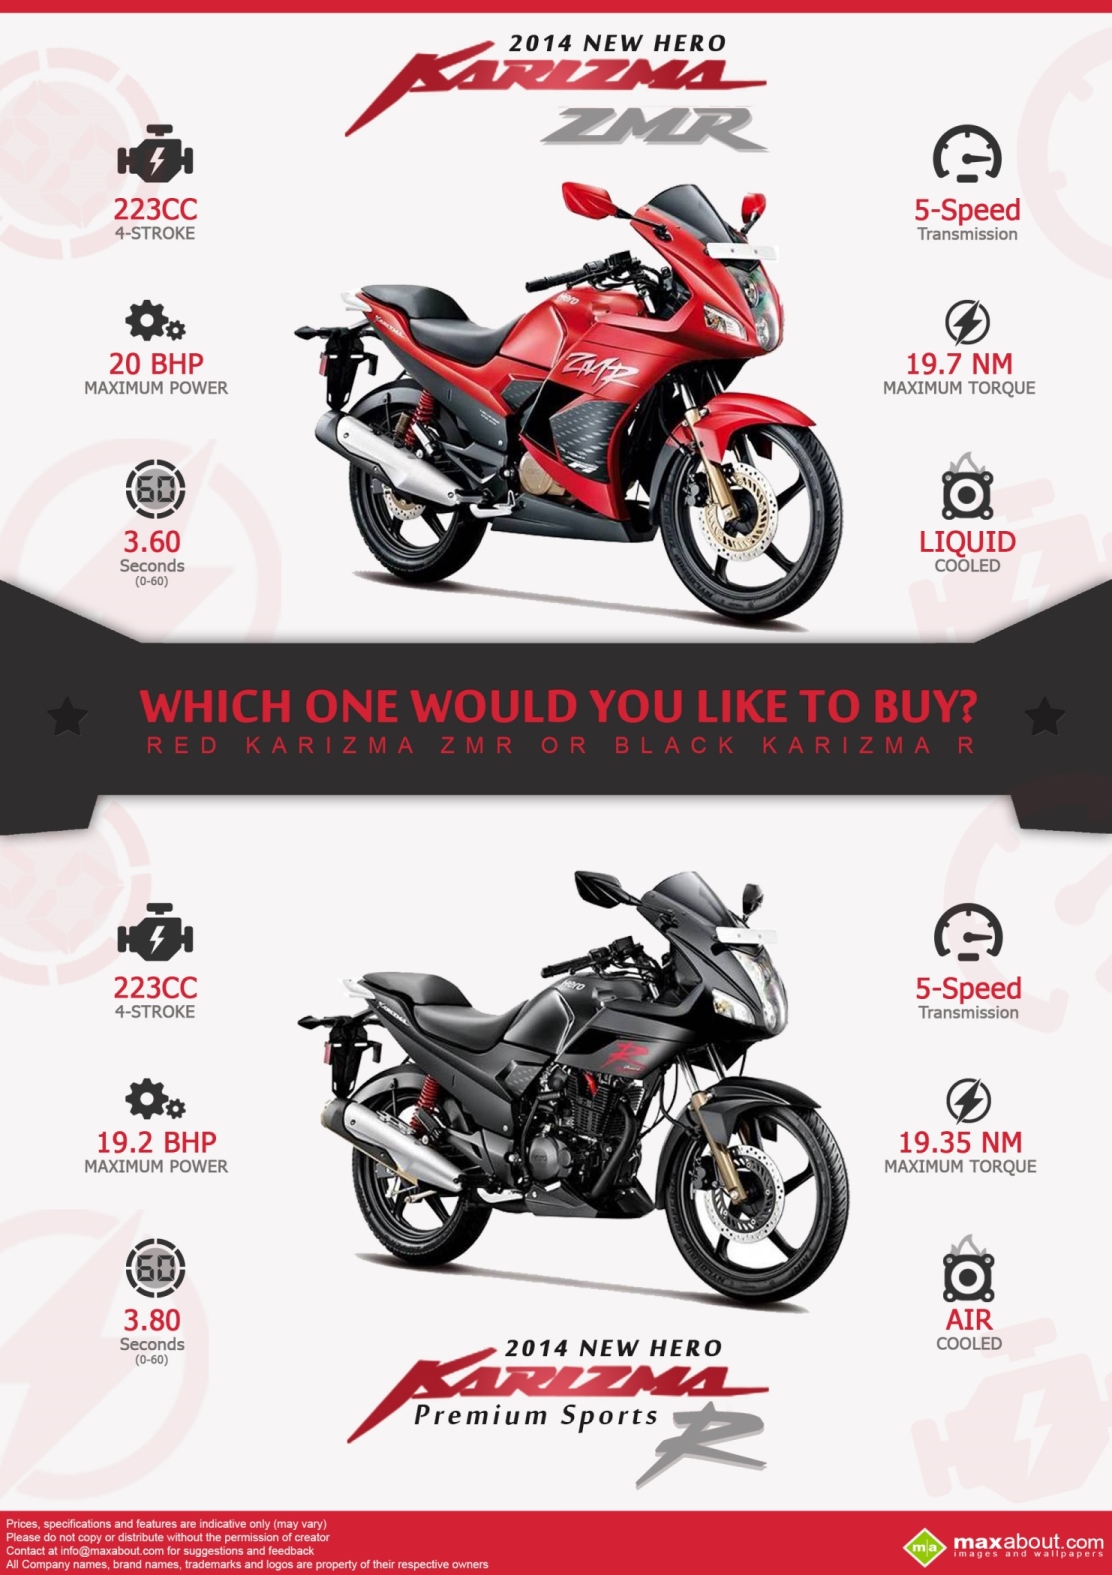 Which one would you like to buy? - Red Karizma ZMR OR Black Karizma R